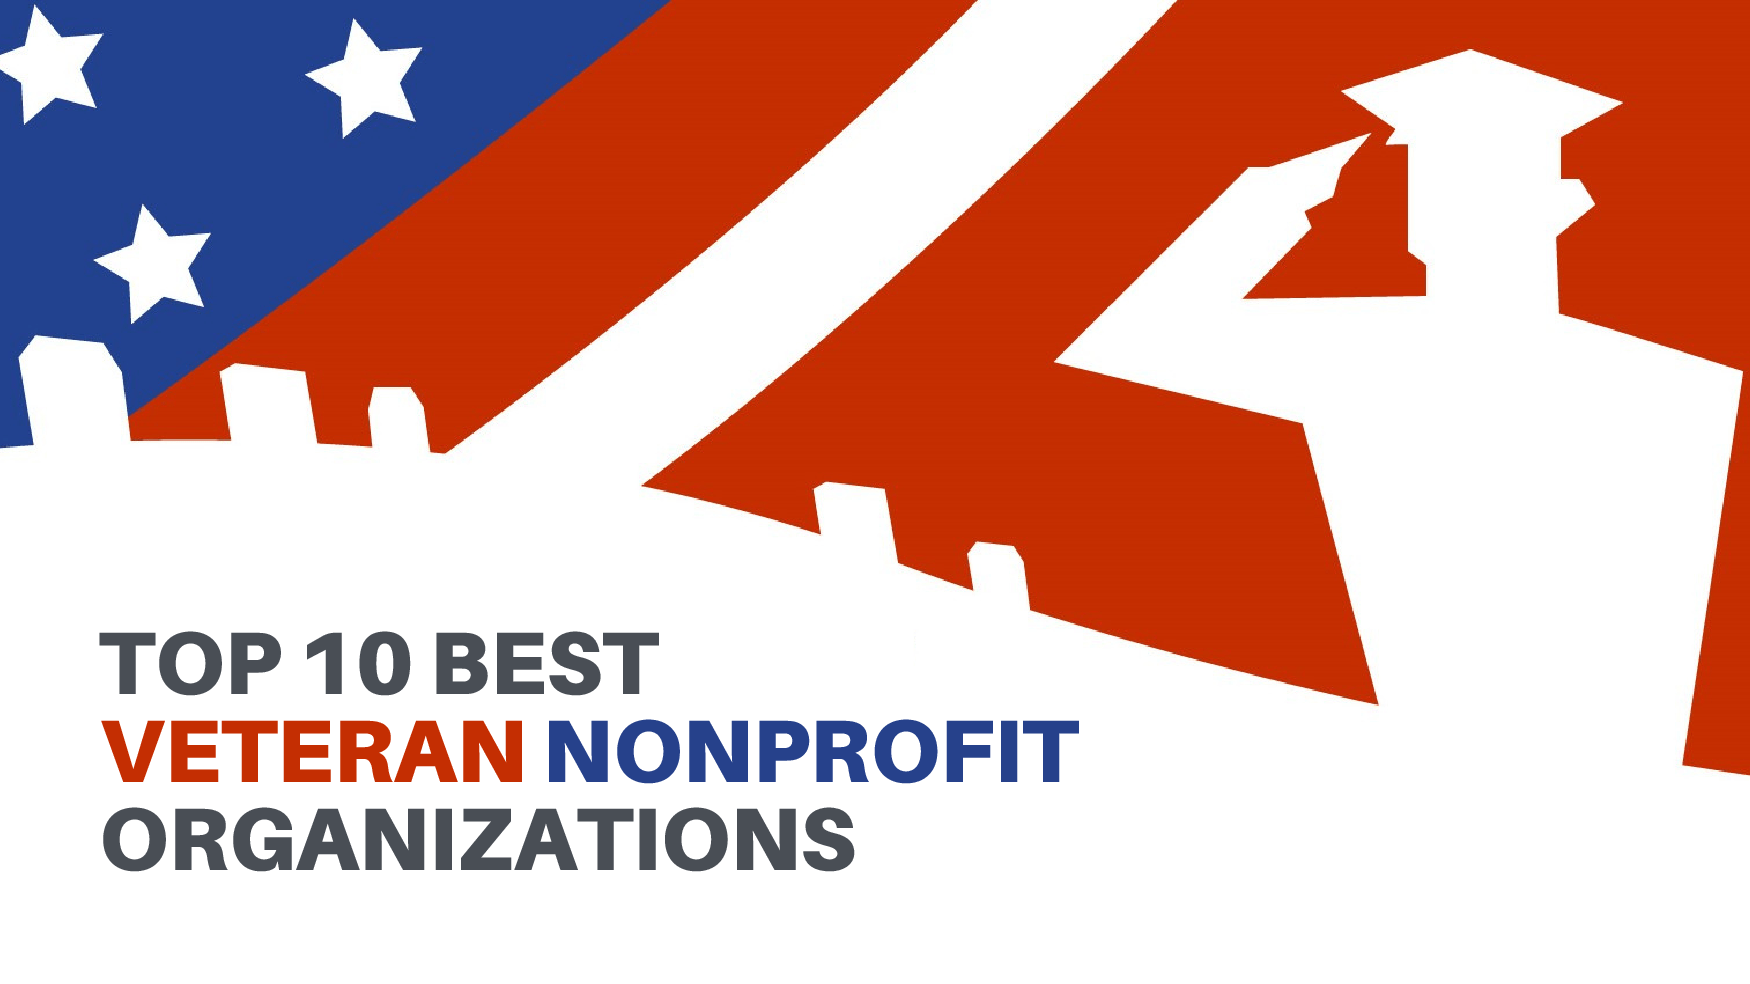 Top 10 Best Veteran Nonprofit Organizations That Are Making A Difference